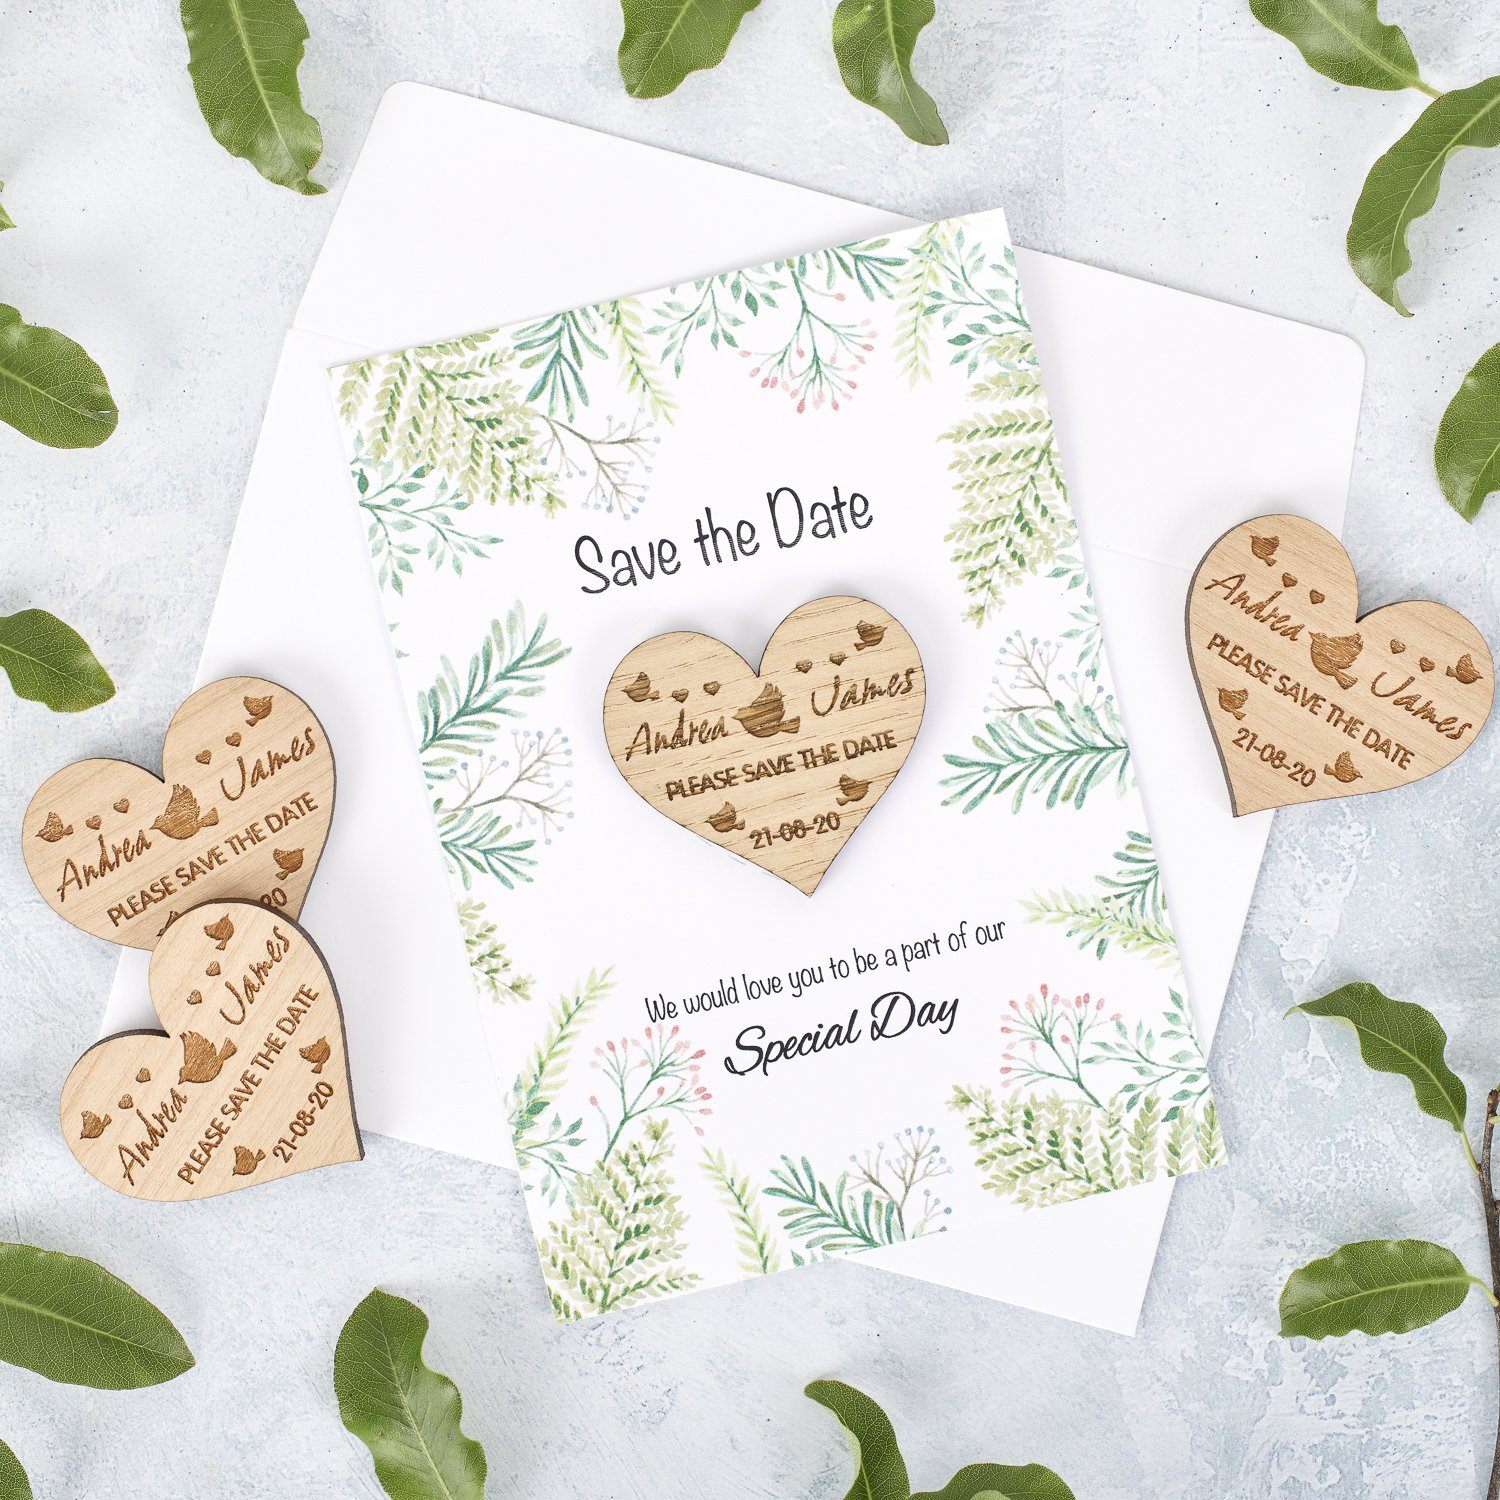 Save The Date Magnet With Cards - Save The Date Magnet Wooden Rustic & Cards - Heart Lovebirds